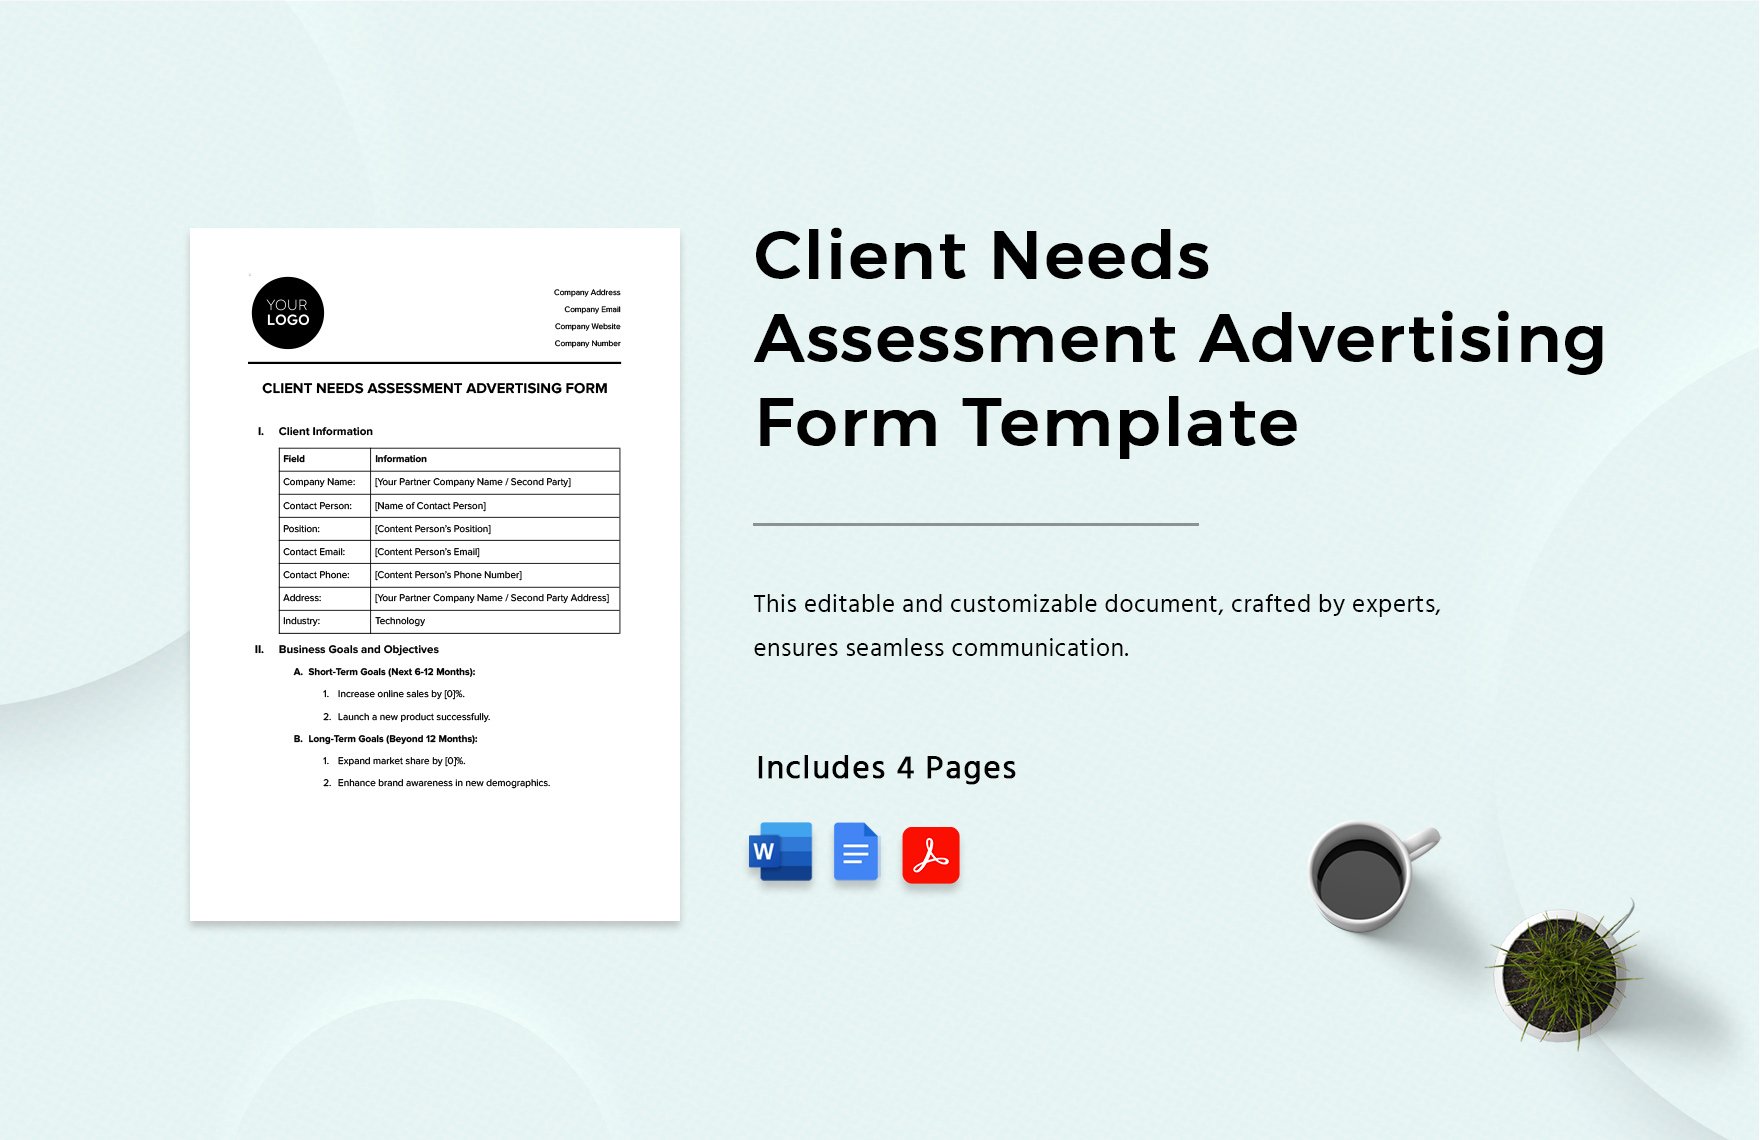 Client Needs Assessment Advertising Form Template in Word, Google Docs, PDF